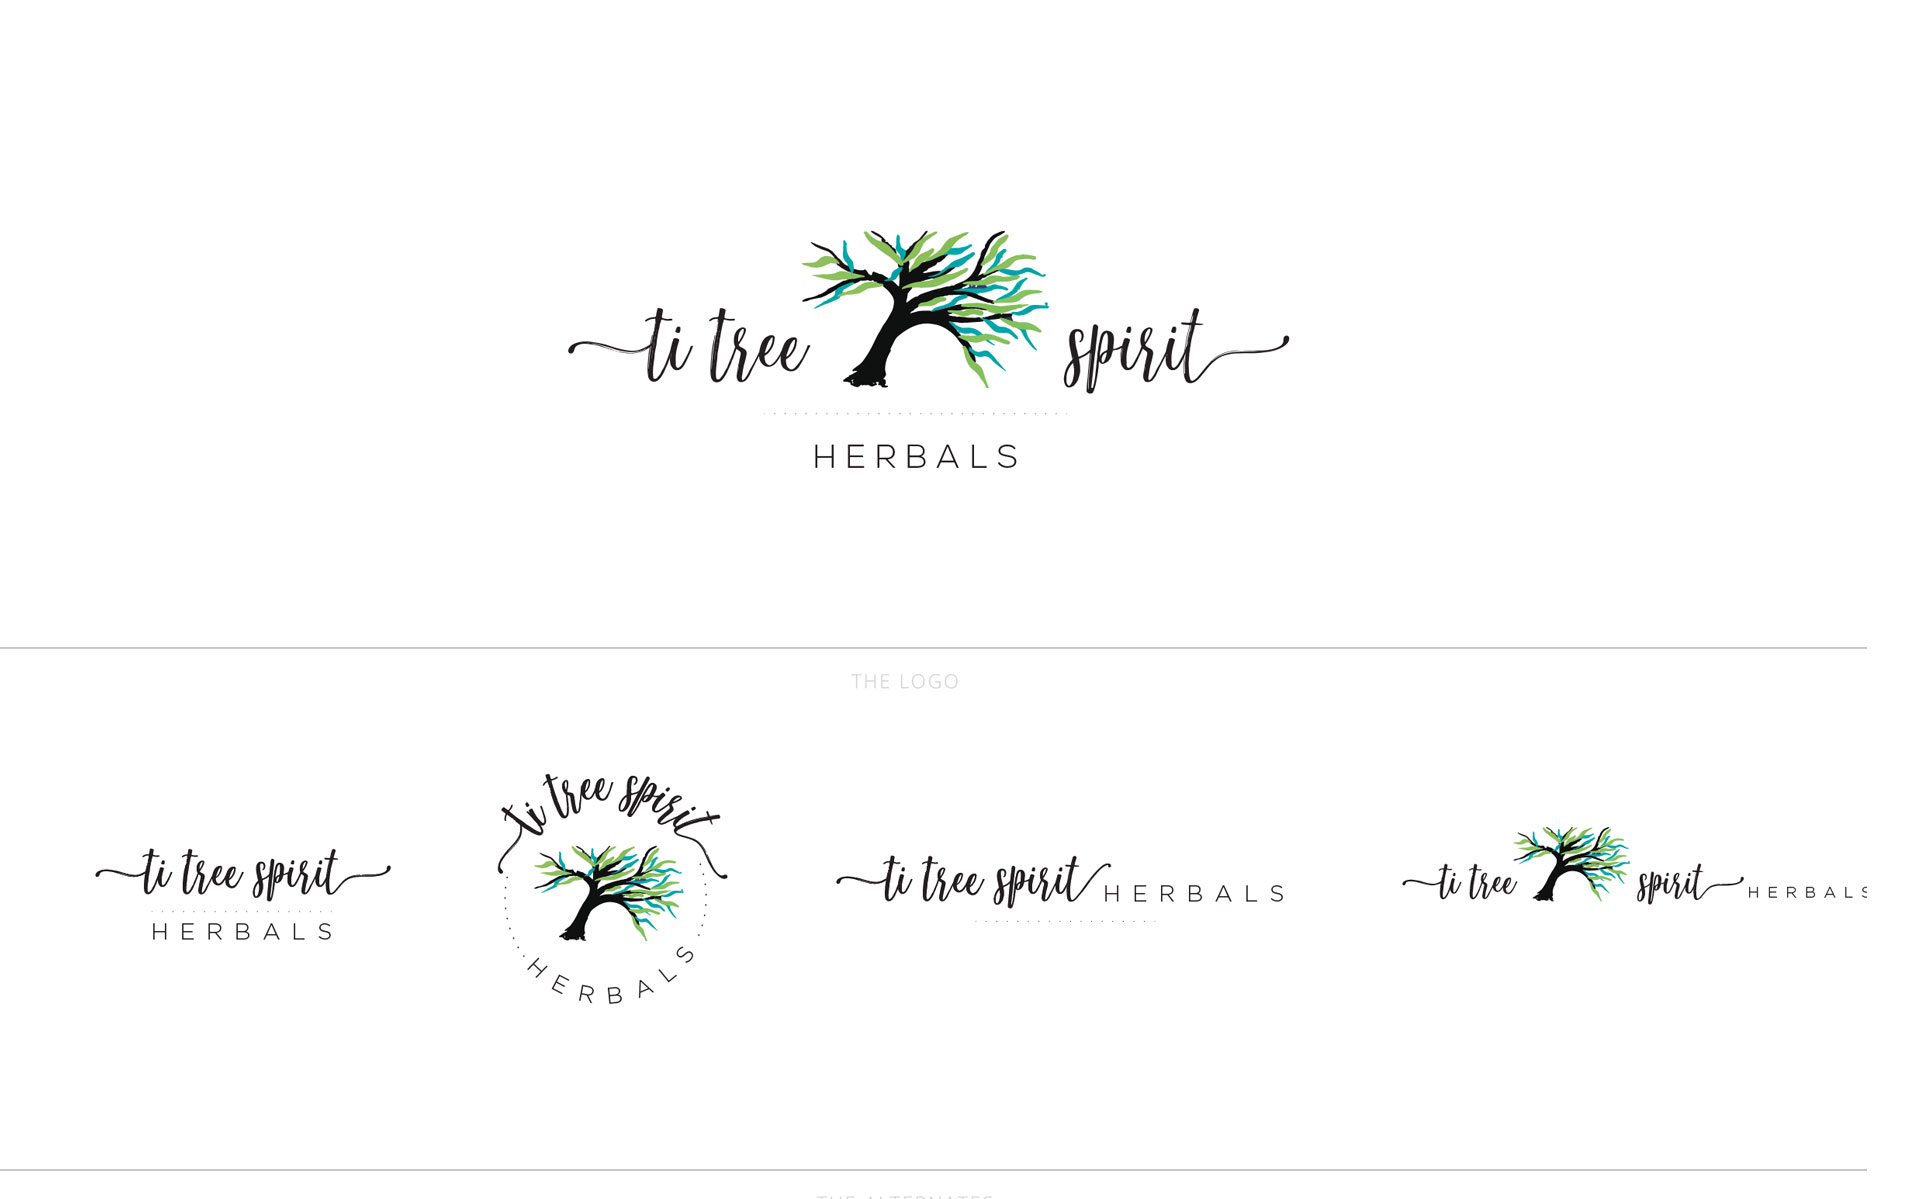 TiTree Spirit Herbals logo, branding, packaging, marketing, events & online designed by Amy at Yellow Sunday